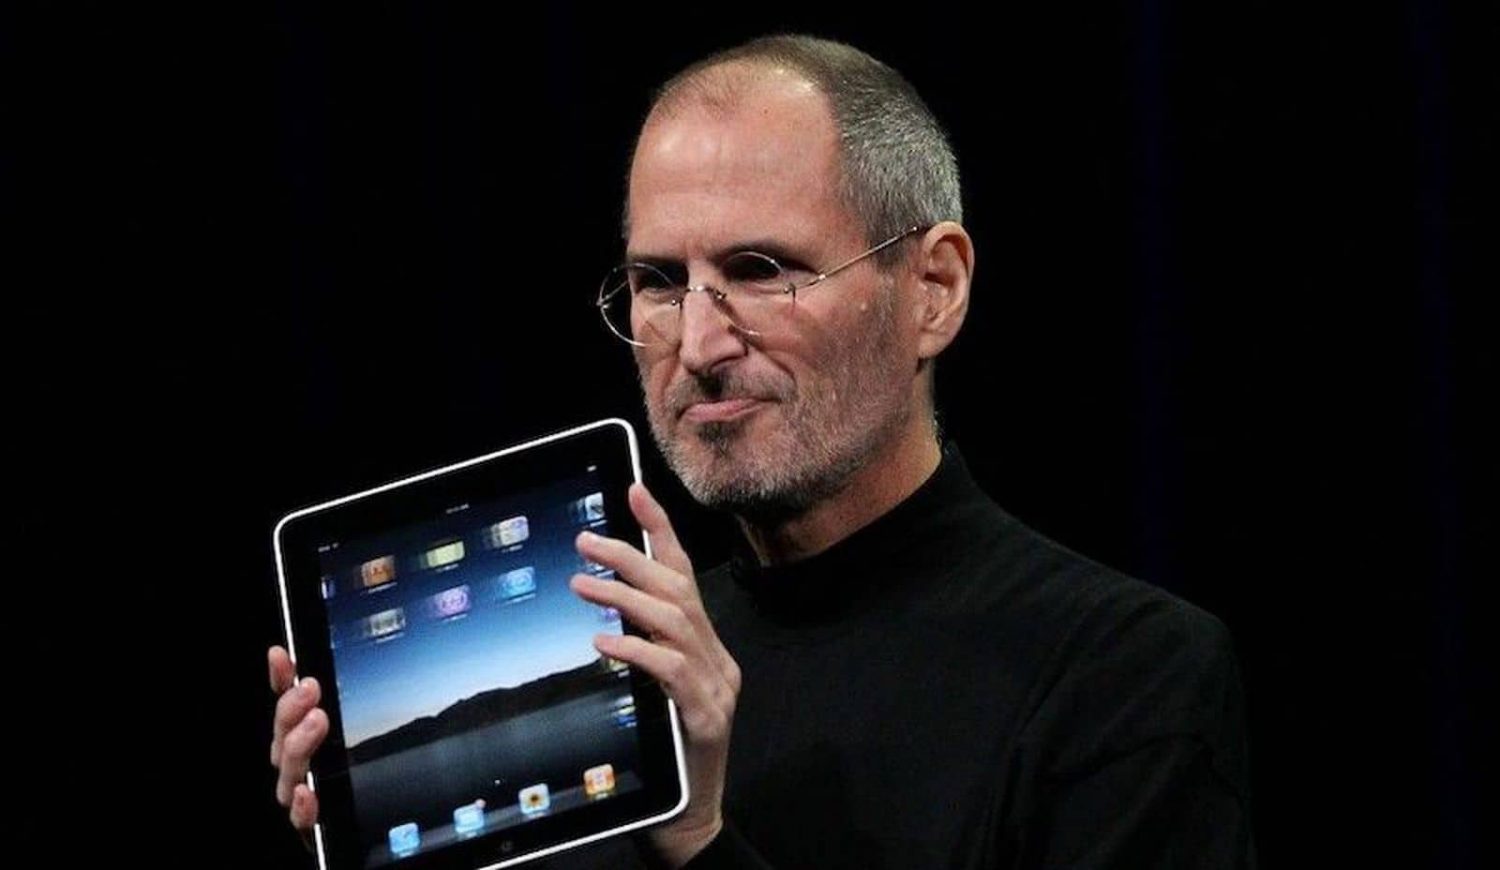 Apple's iPad: A Look Back At A Decade Of Innovation